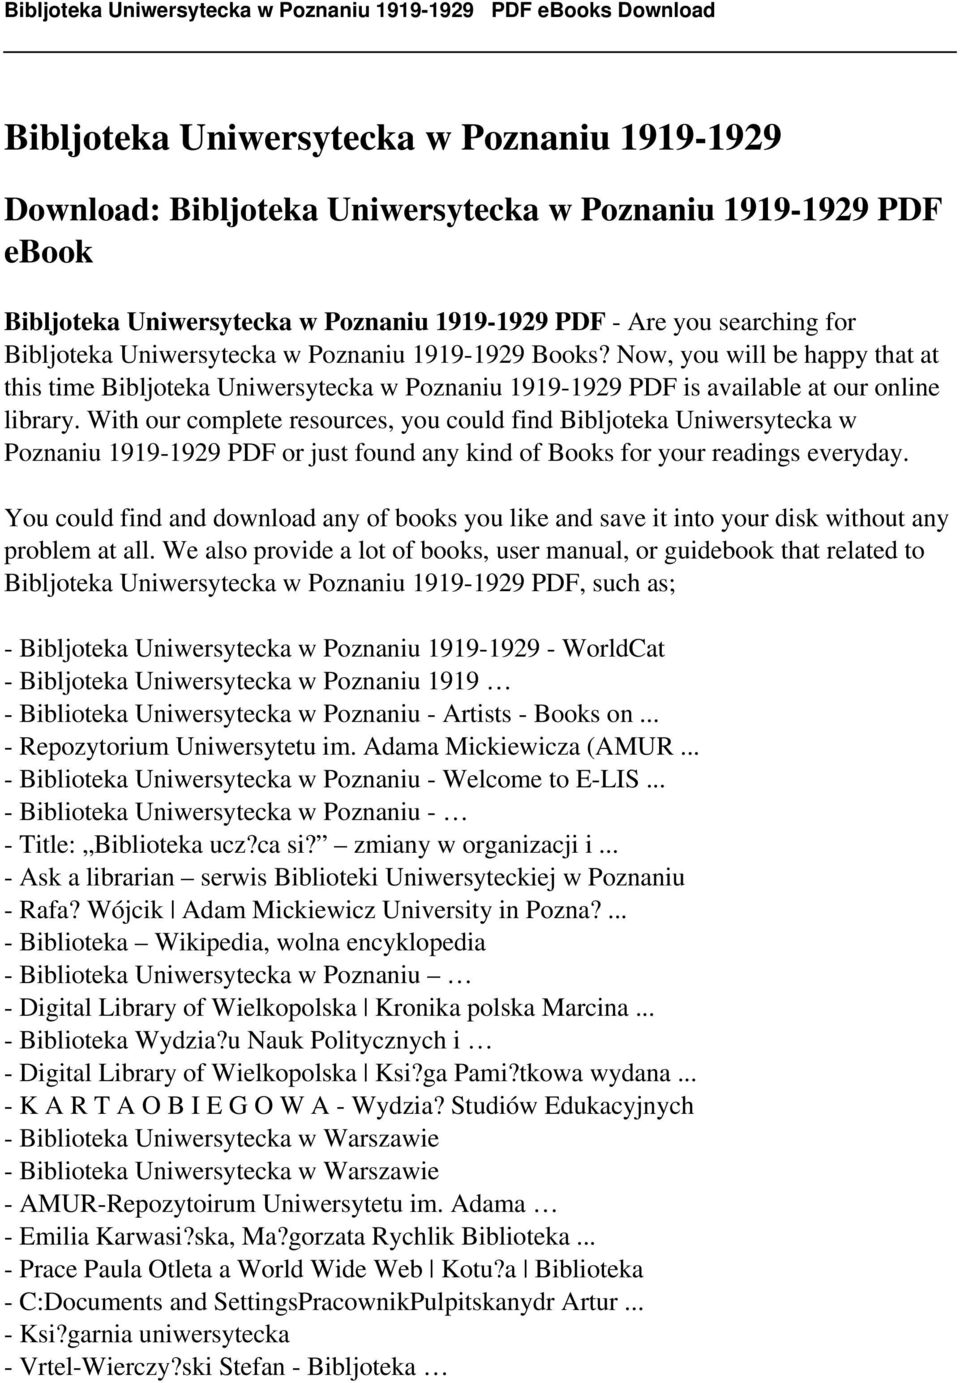 With our complete resources, you could find Bibljoteka Uniwersytecka w Poznaniu 1919-1929 PDF or just found any kind of Books for your readings everyday.